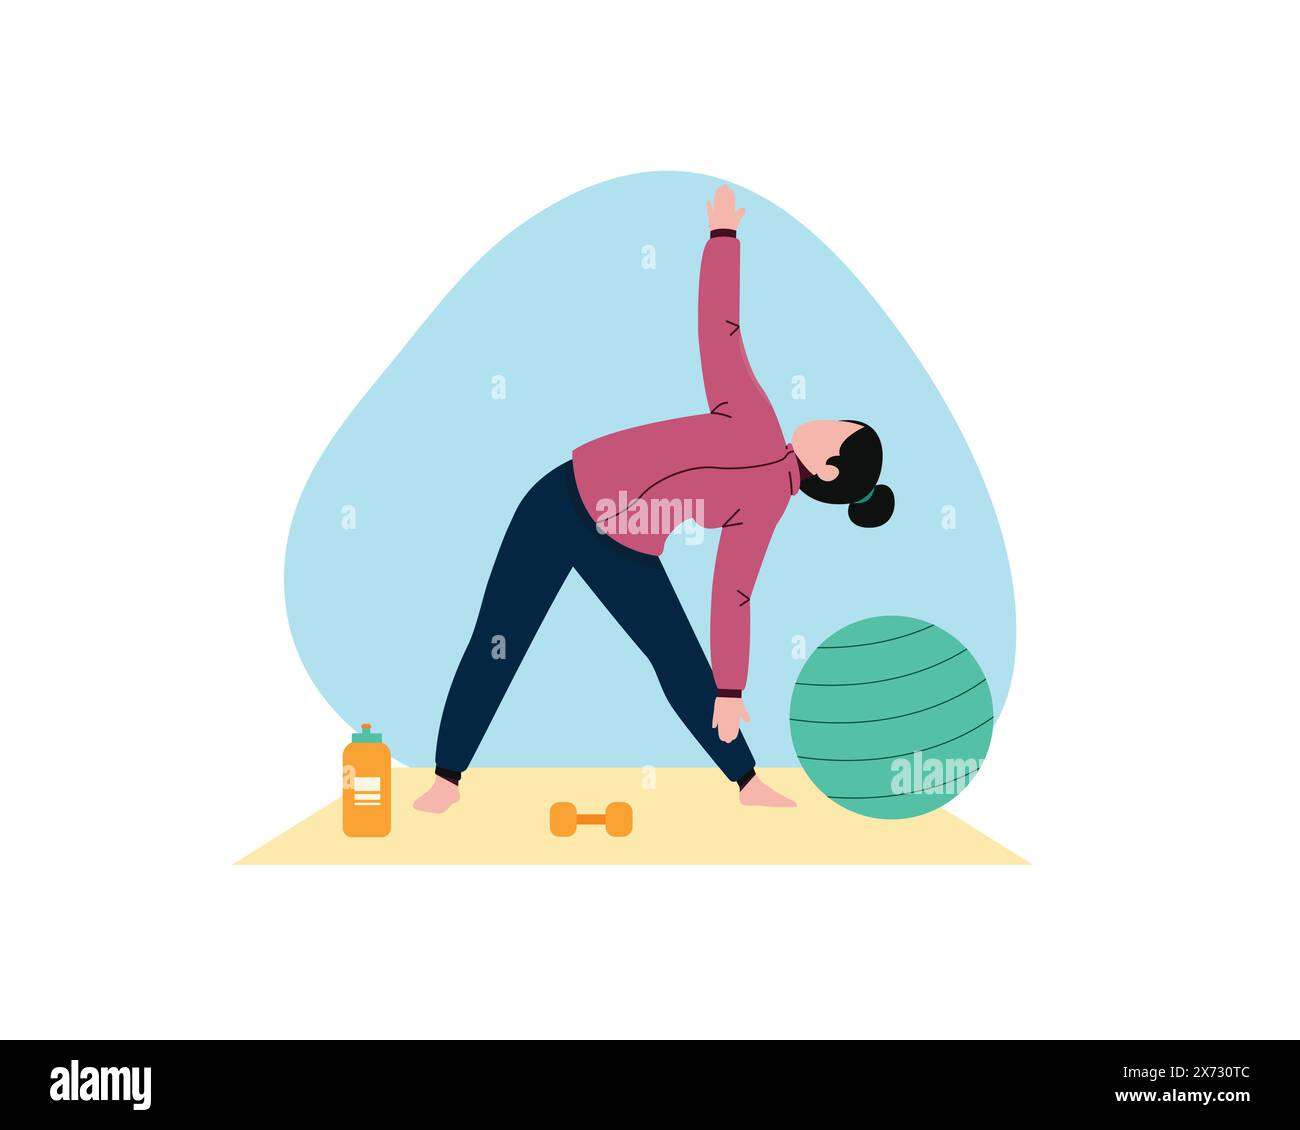 Young woman stretching to do a heavy workout. sport and recreation concept. Healthy lifestyle illustration in flat style design Stock Vector